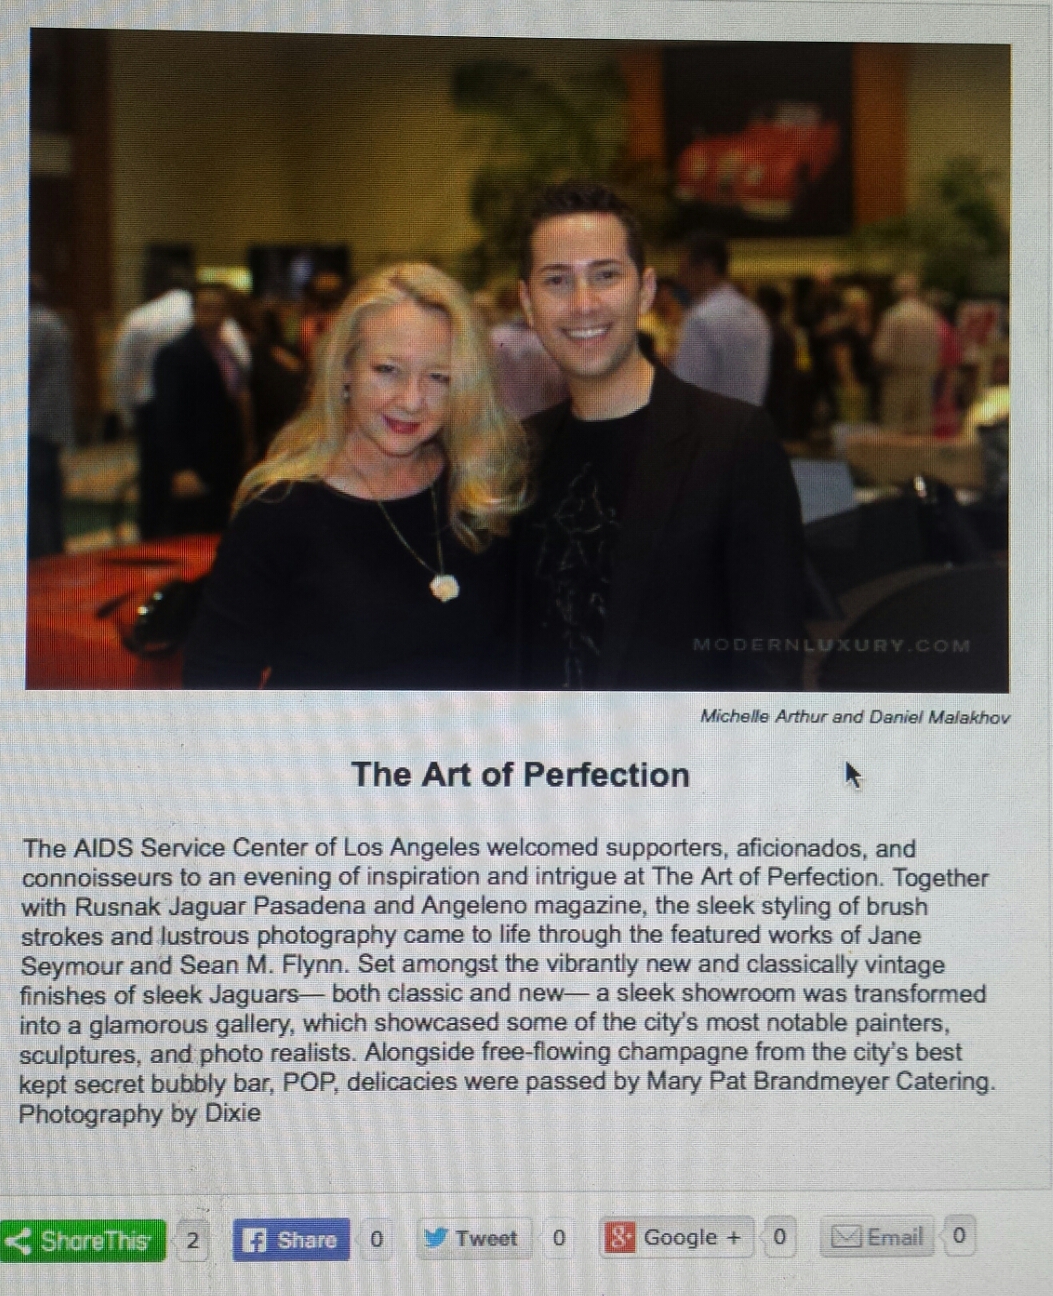 Article from Modern Luxury/Angeleno magazine's website. Artists' night with the work of Golden Globe winning Actress Jane Seymour and her son Sean M. Flynn